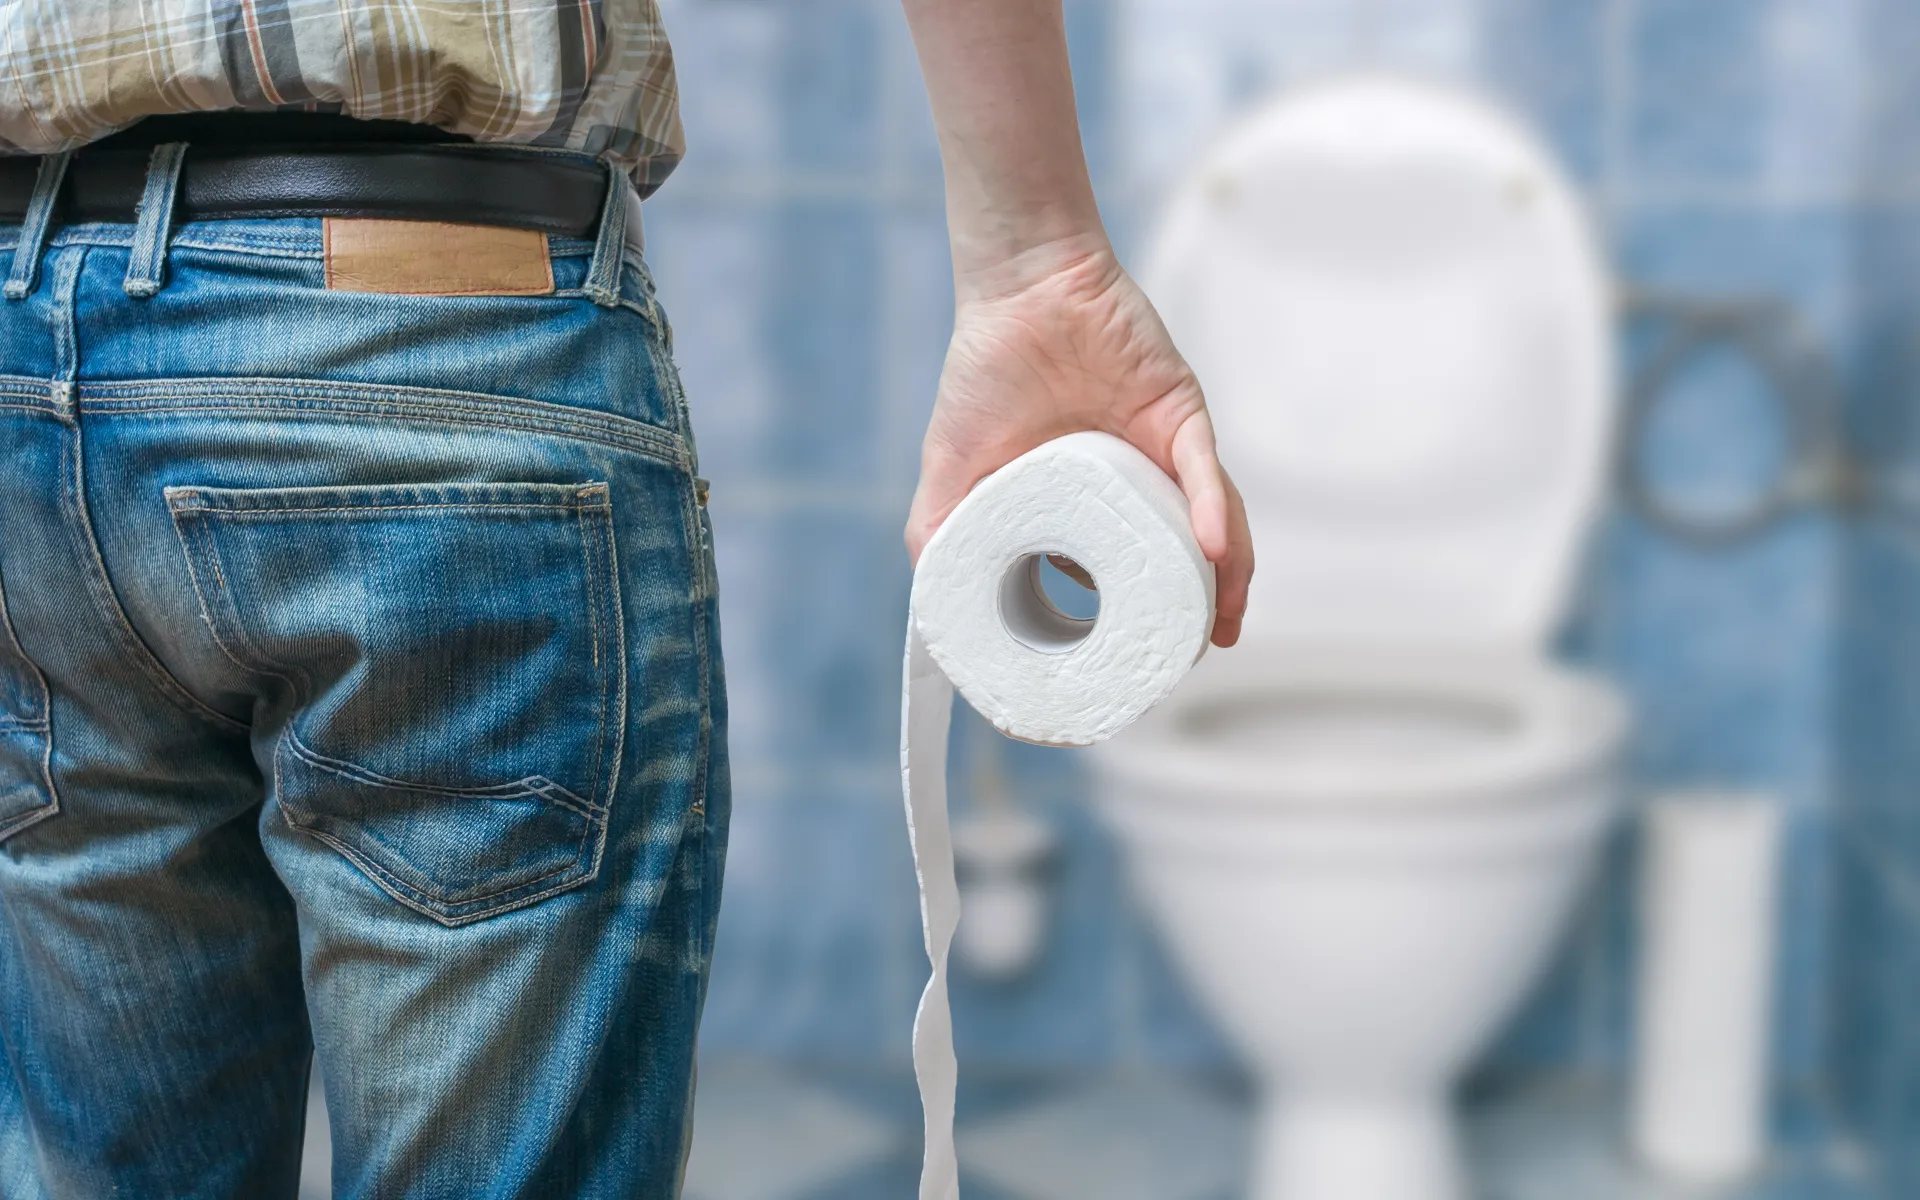 20 Things People With IBS Want You to Know